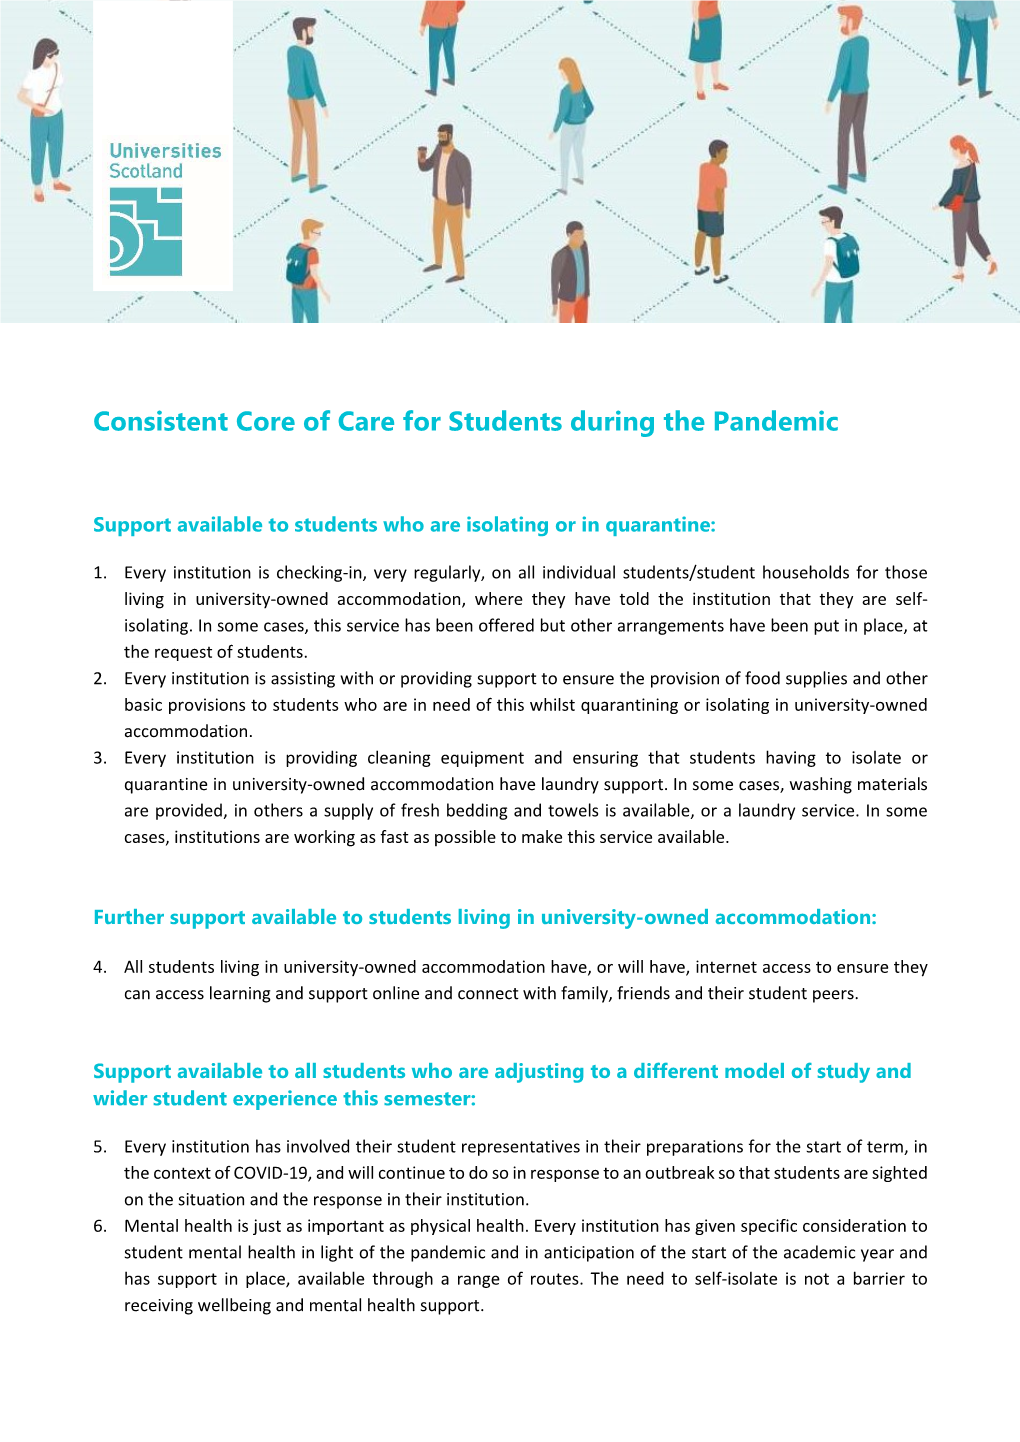 Consistent Core of Care for Students During the Pandemic